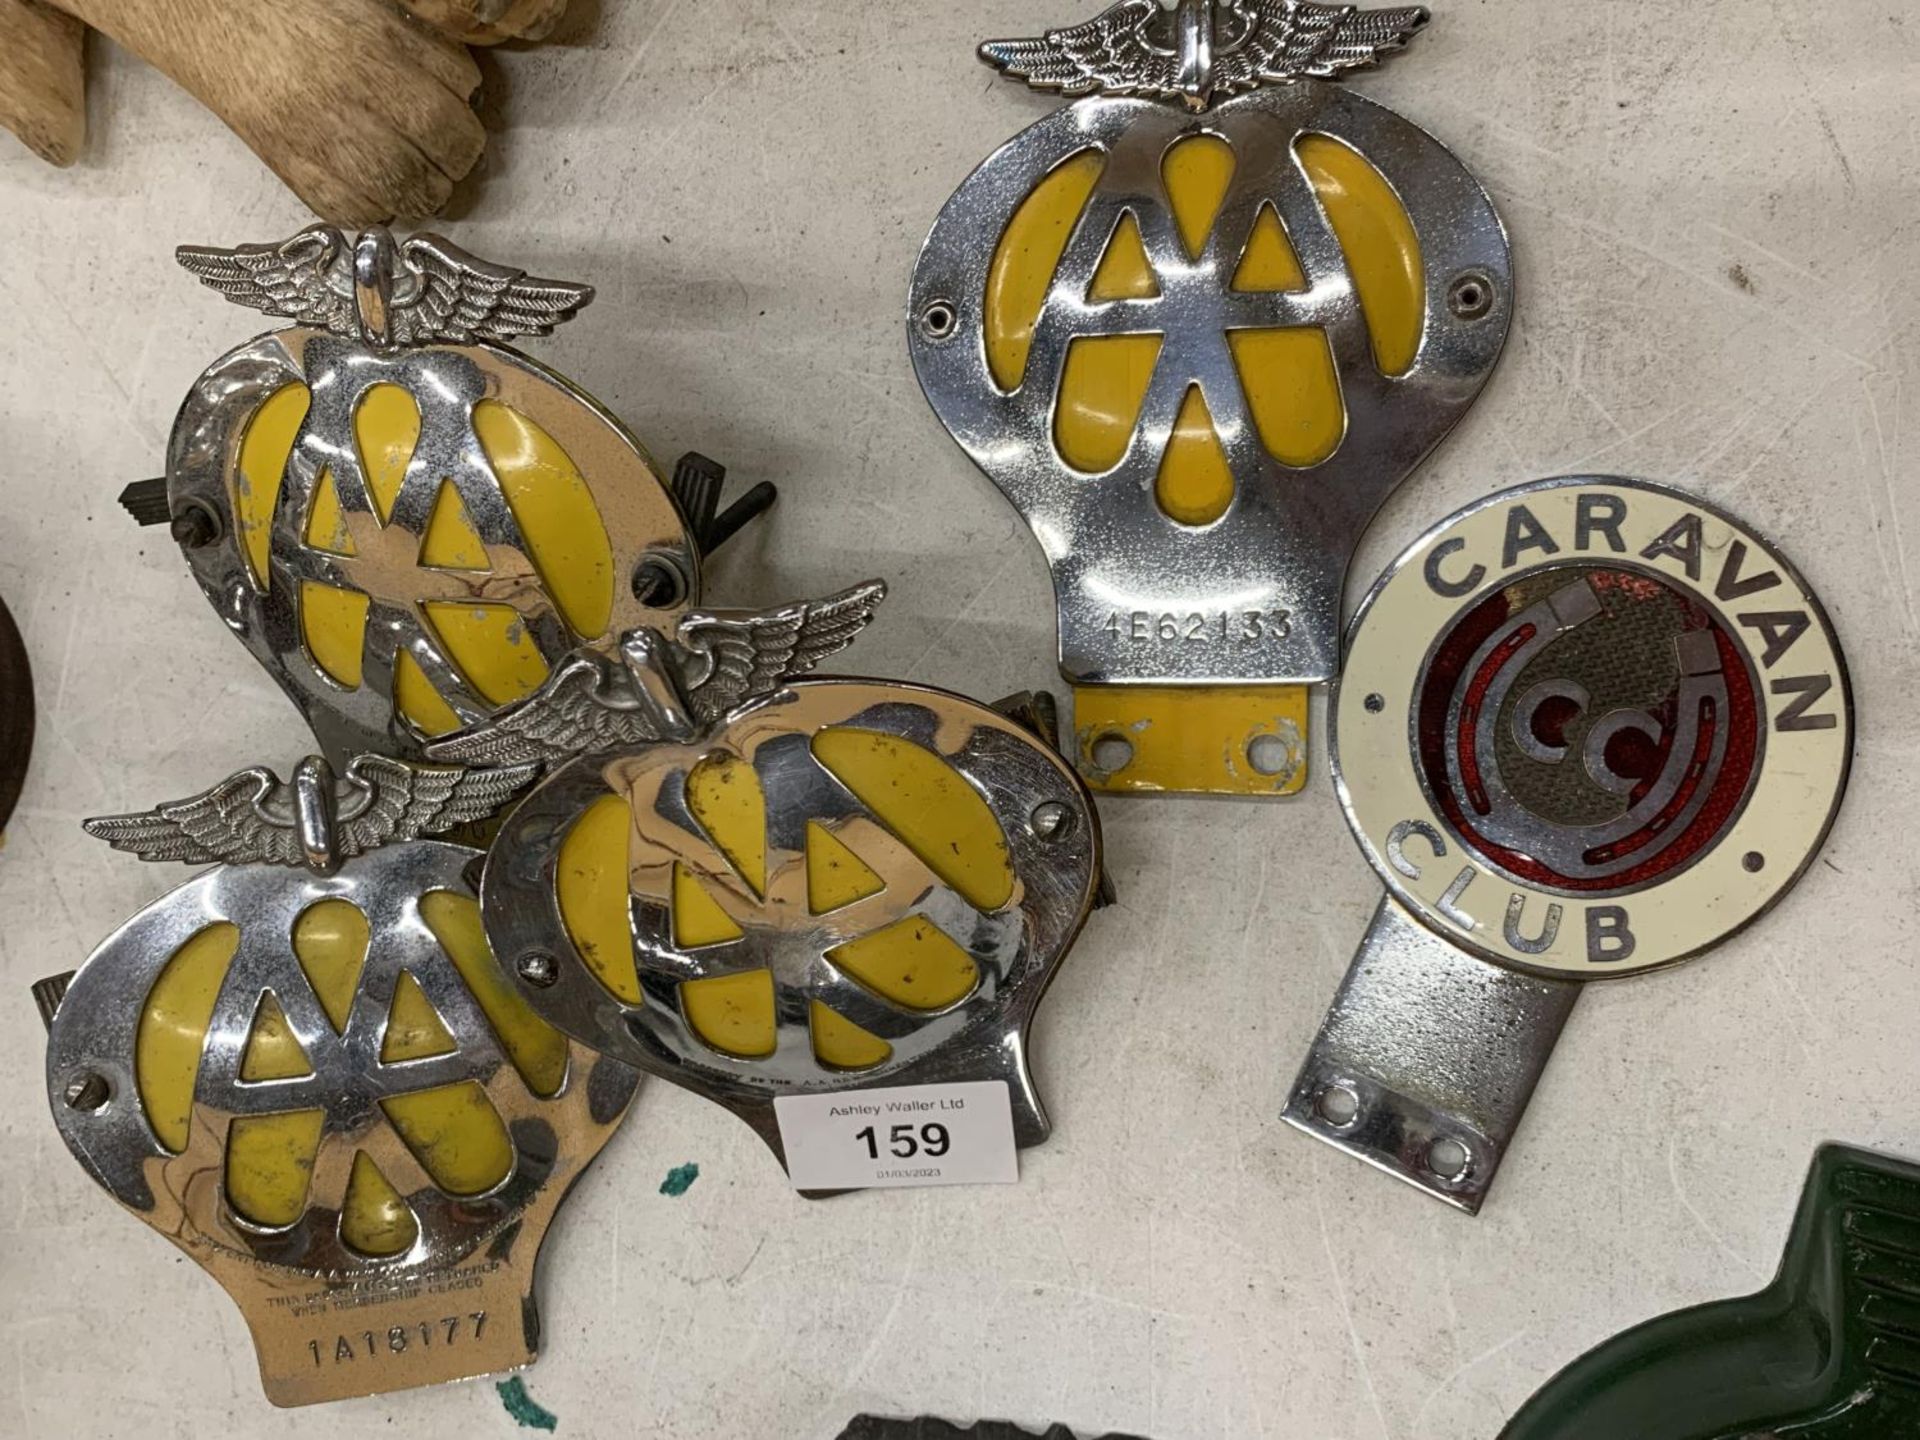 AQUANTITY OF VINTAGE CAR BADGES TO INCLUDE THE A A AND THE CARAVAN CLUB - Image 2 of 6